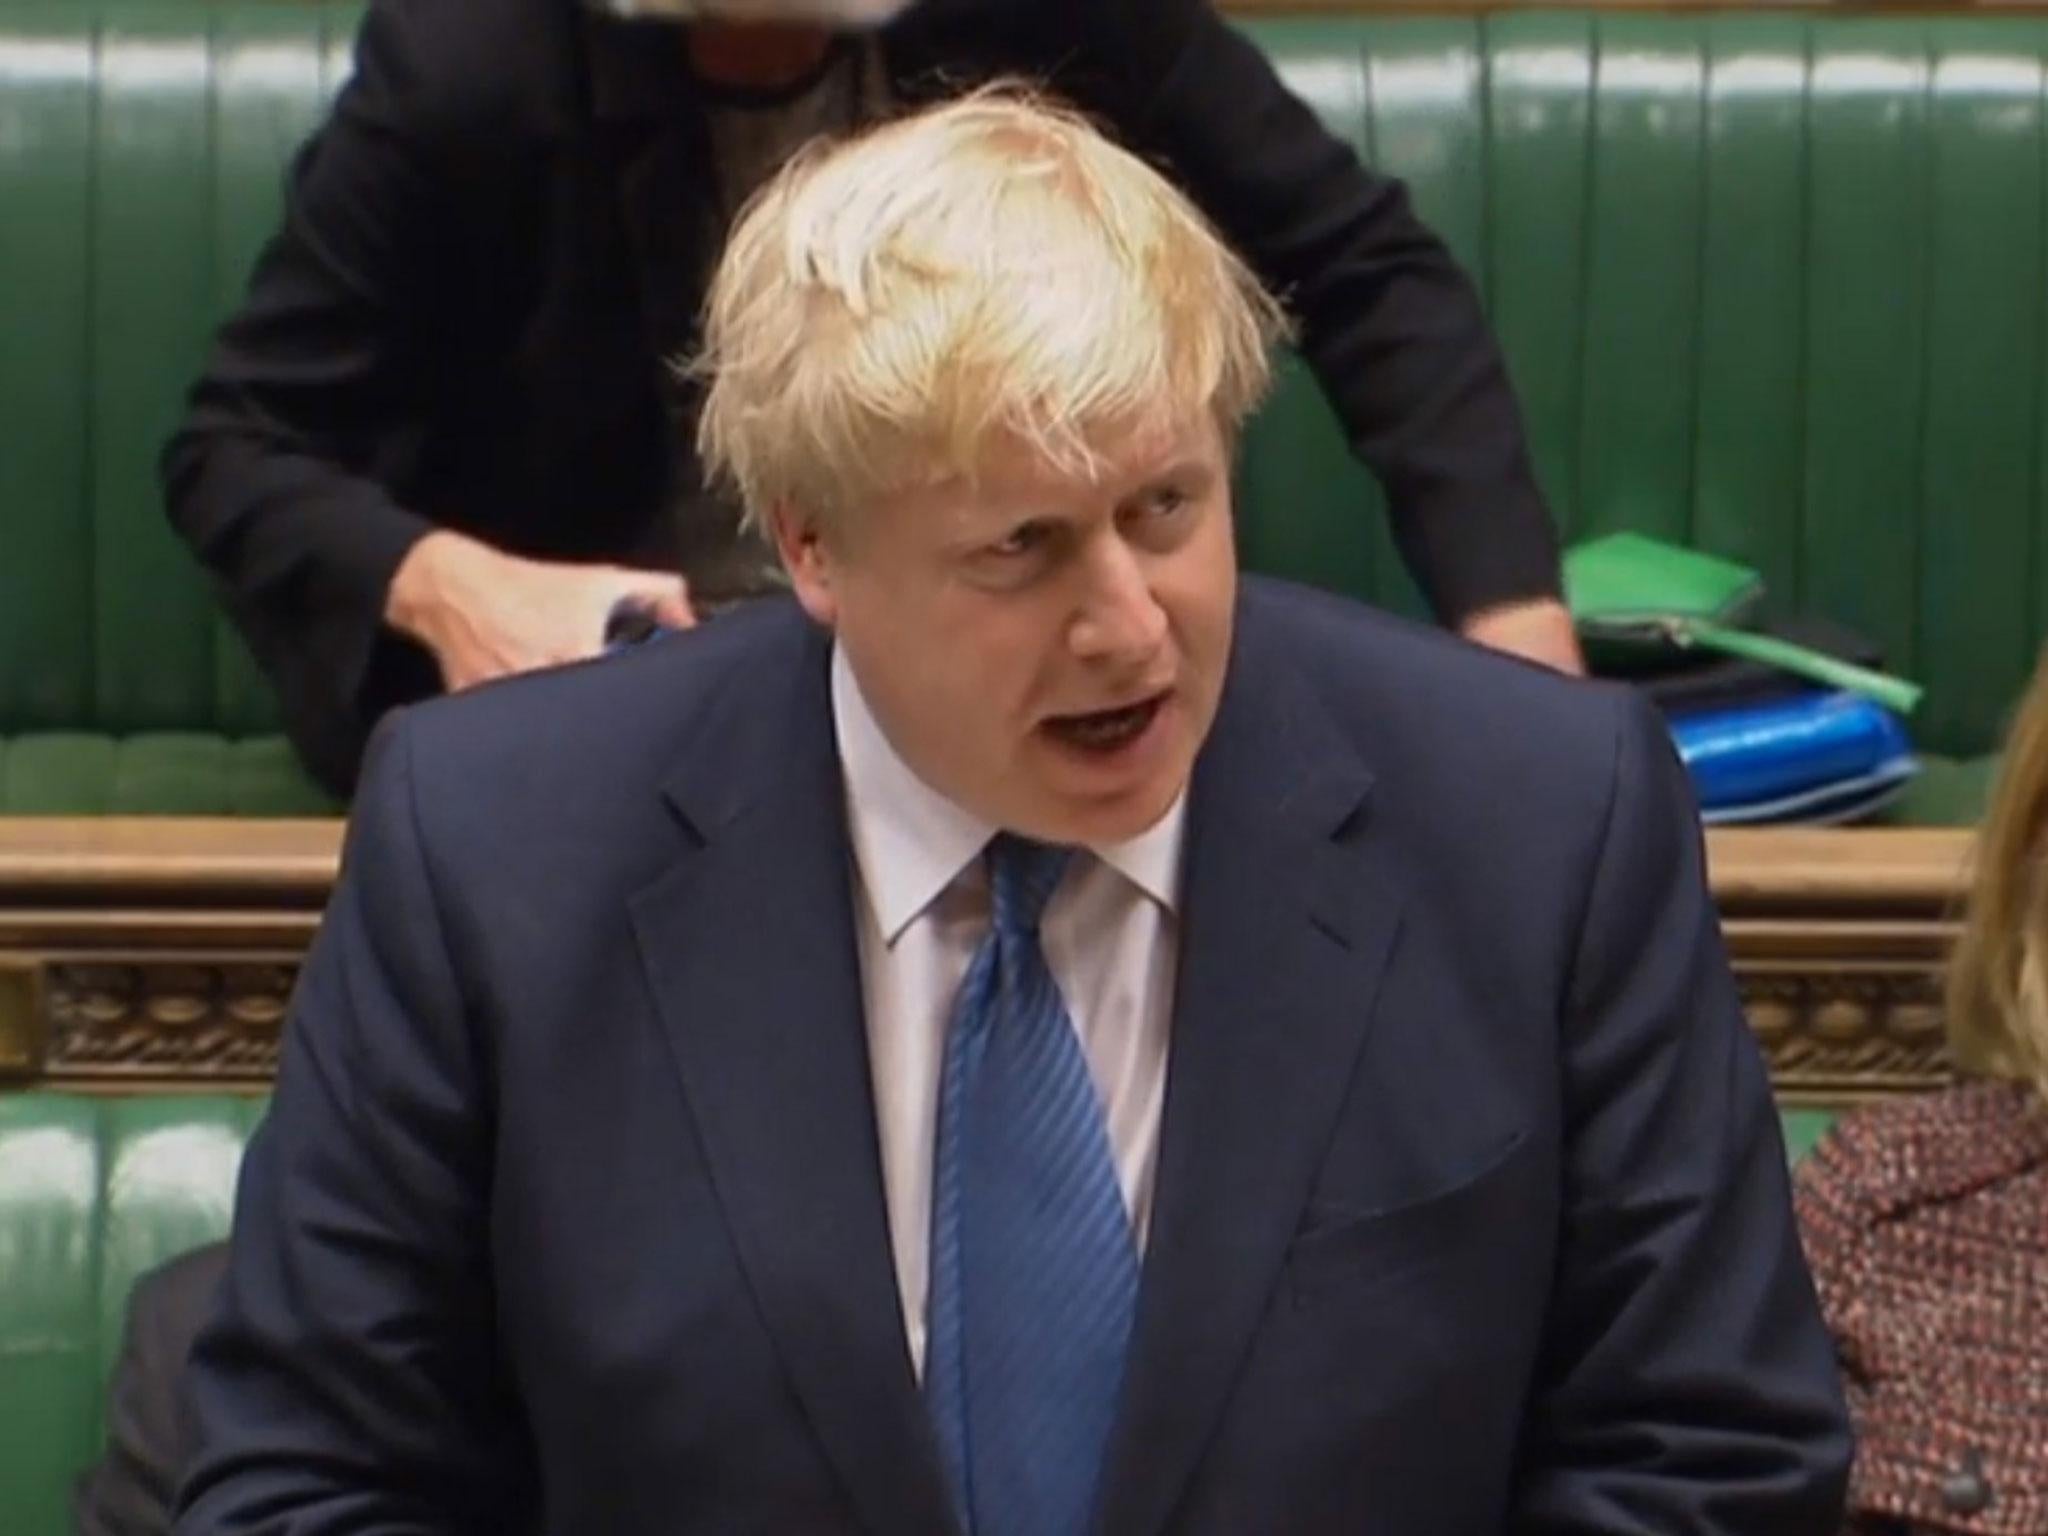 Boris Johnson answering questions about Donald Trump's executive order